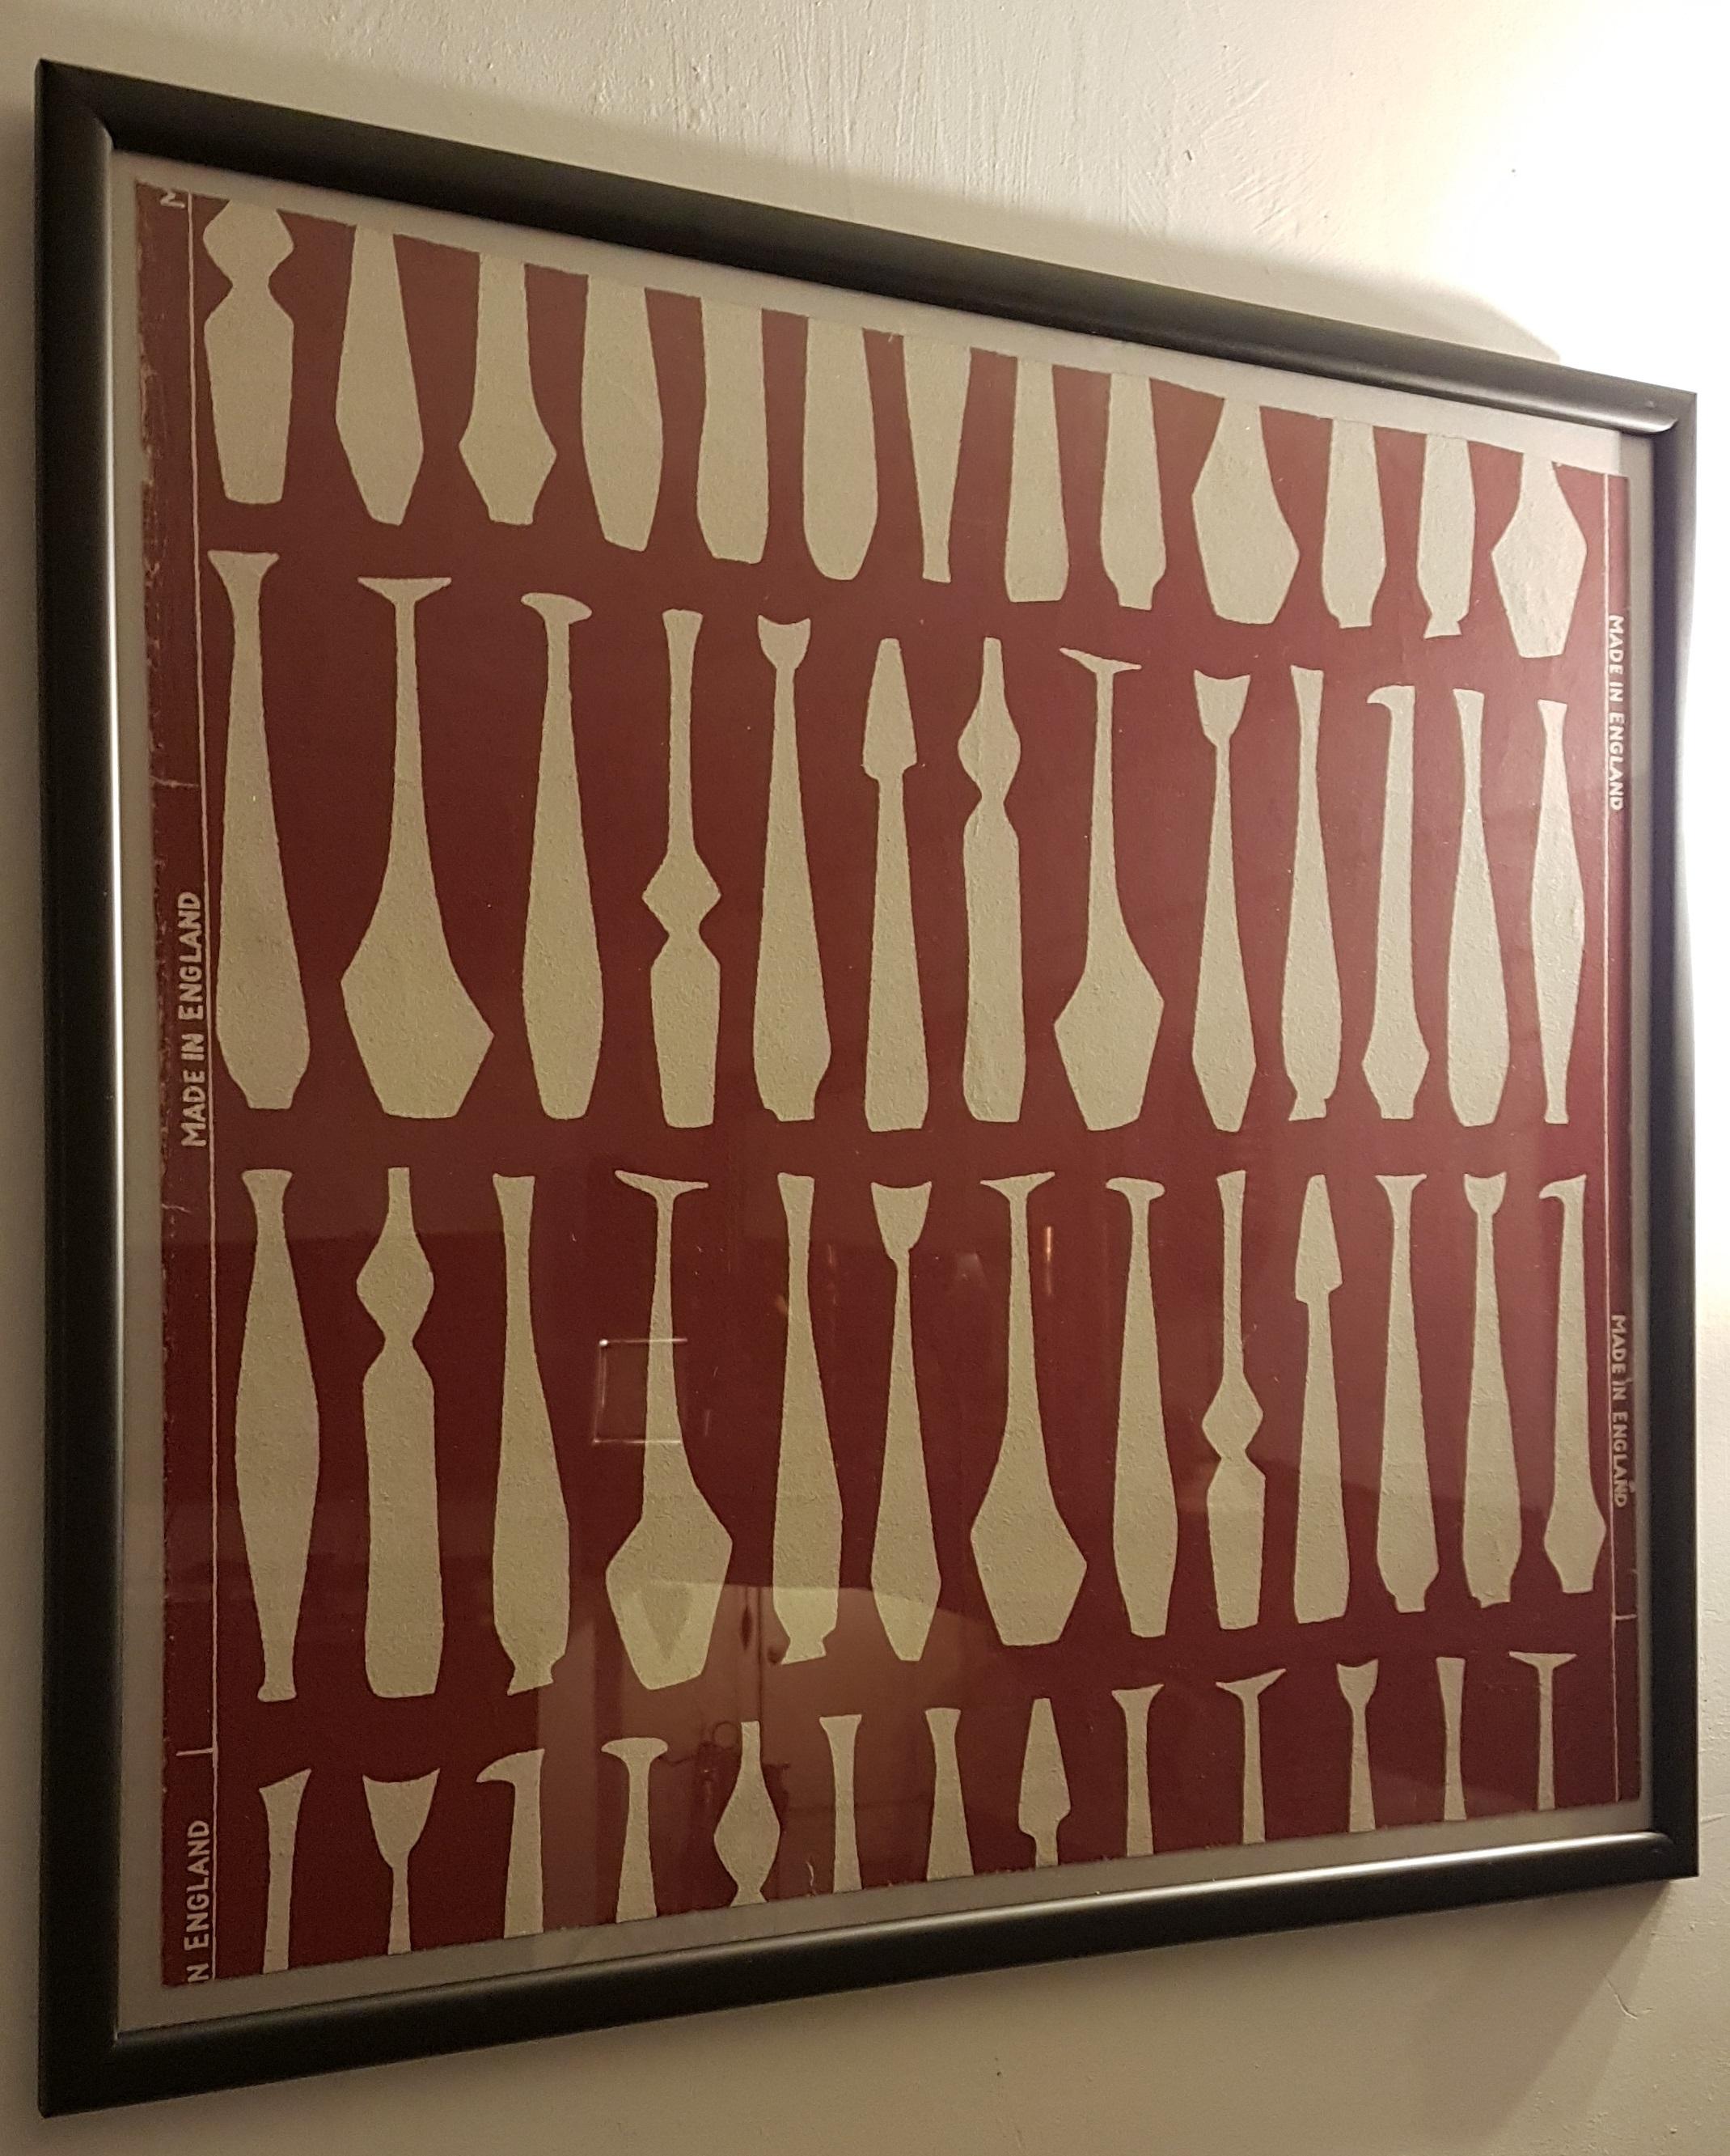 This is an original wallpaper sample from 1952 called Pharos which was designed for Palladio which later became Sanderson. We have had it freshly framed in an elegant rounded matte black frame with glass front and ivory white framing card, to the